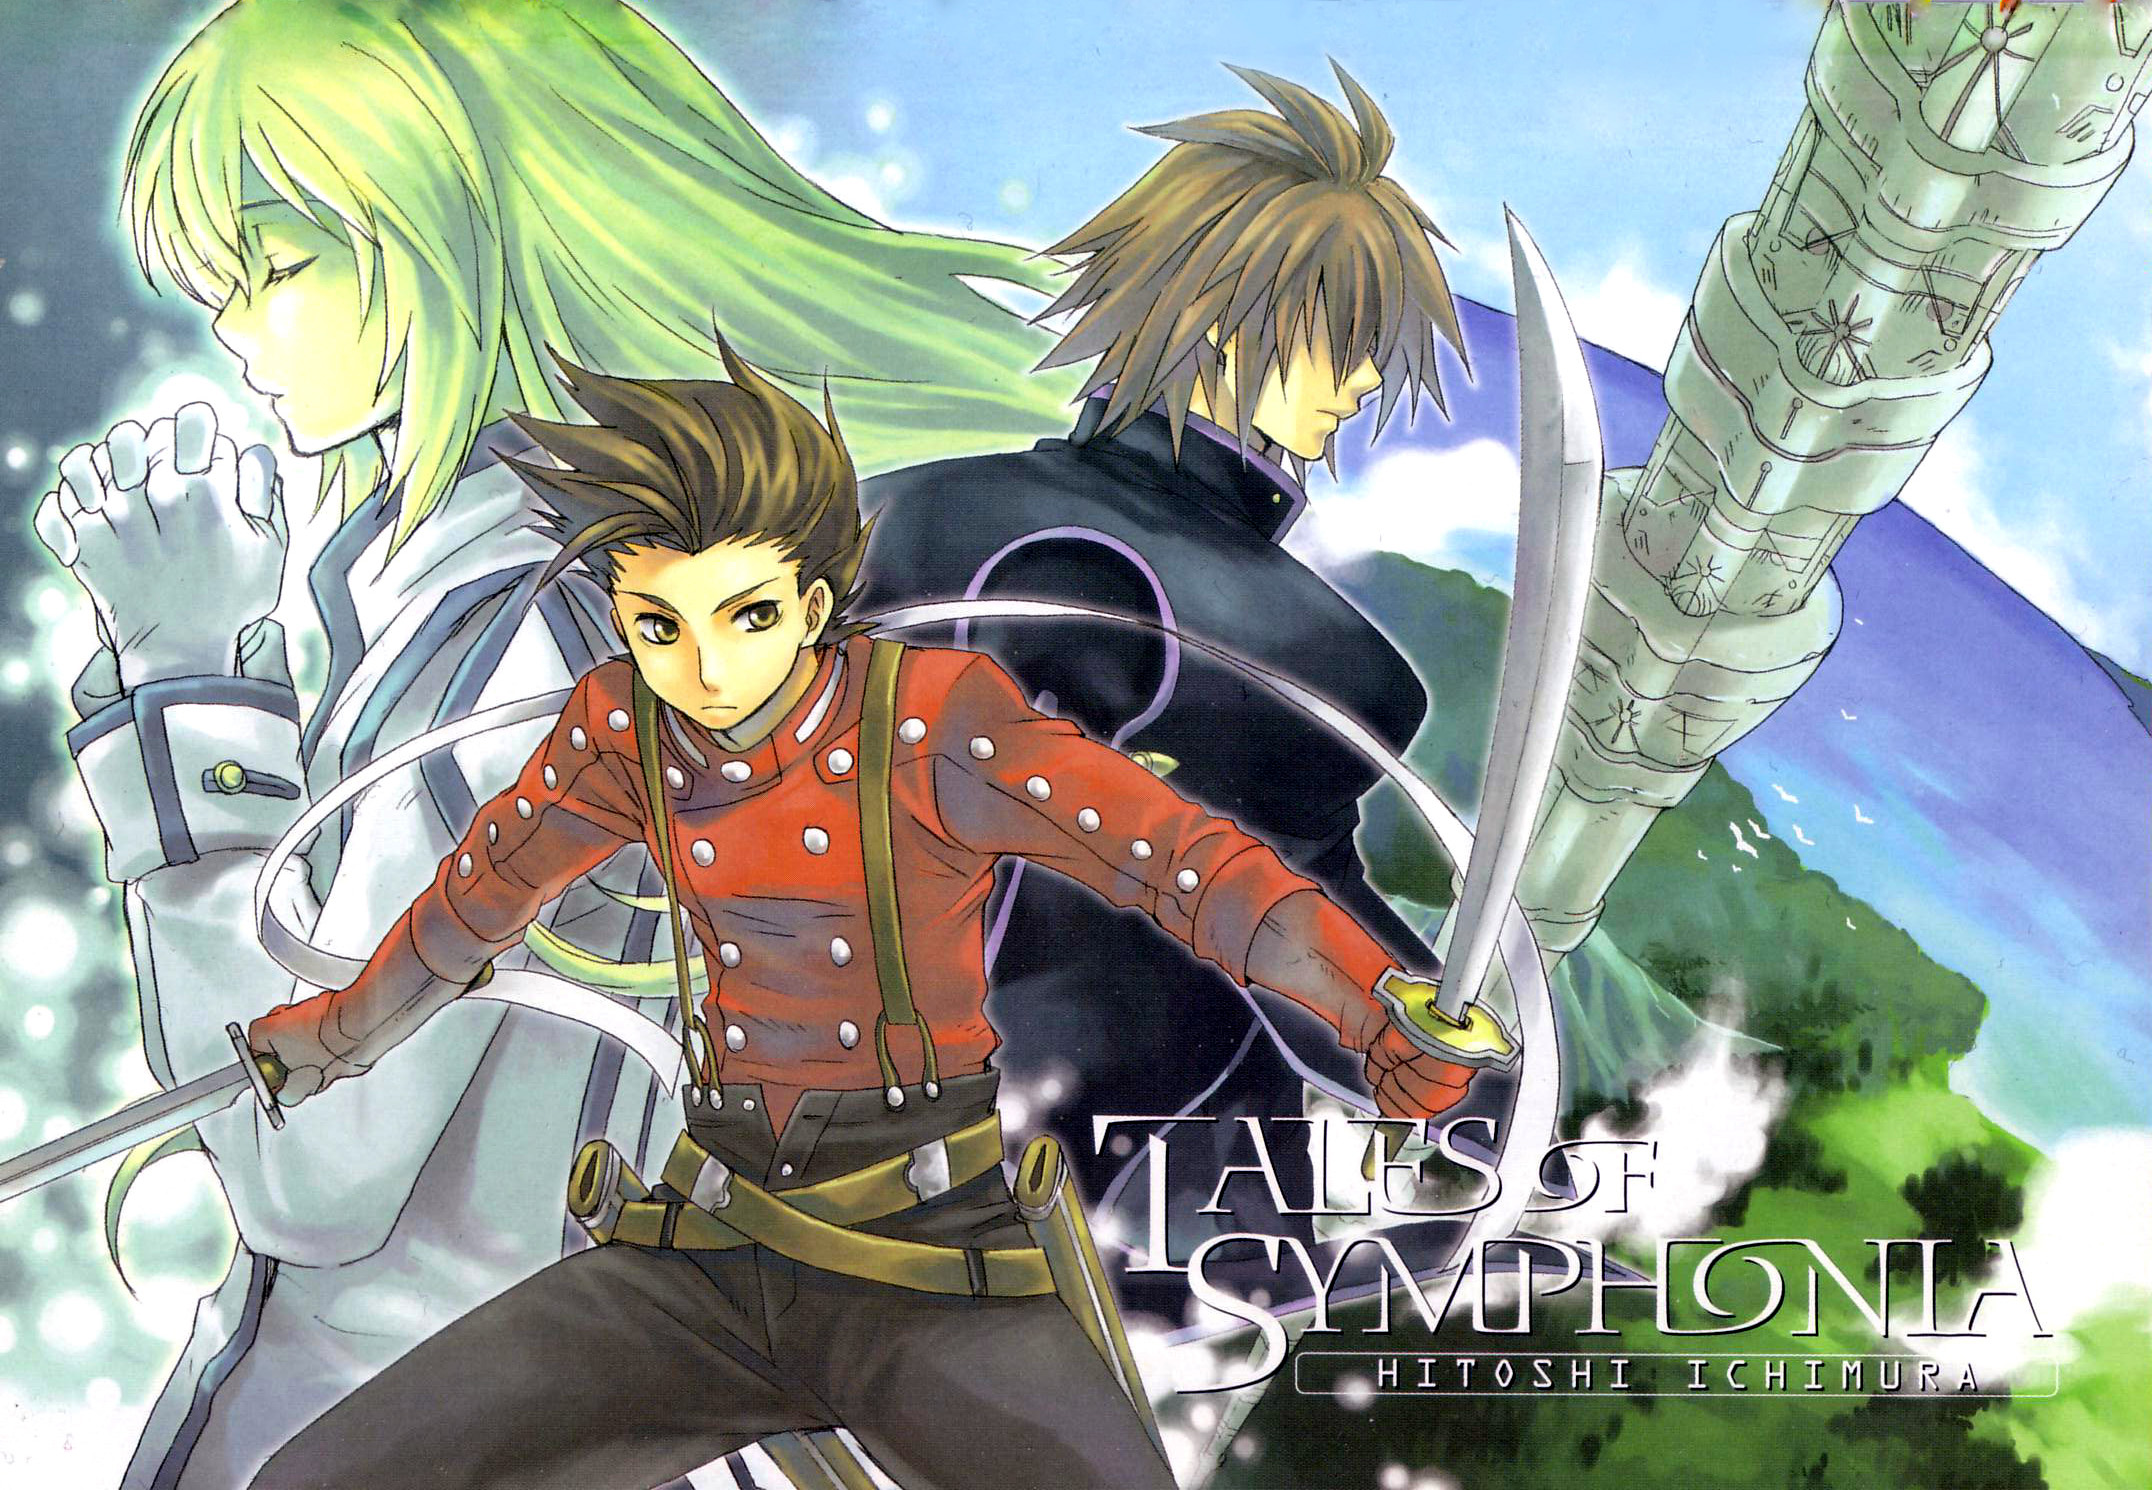 Tethealla Arc Episode 1  Tales of Symphonia The Animation  YouTube